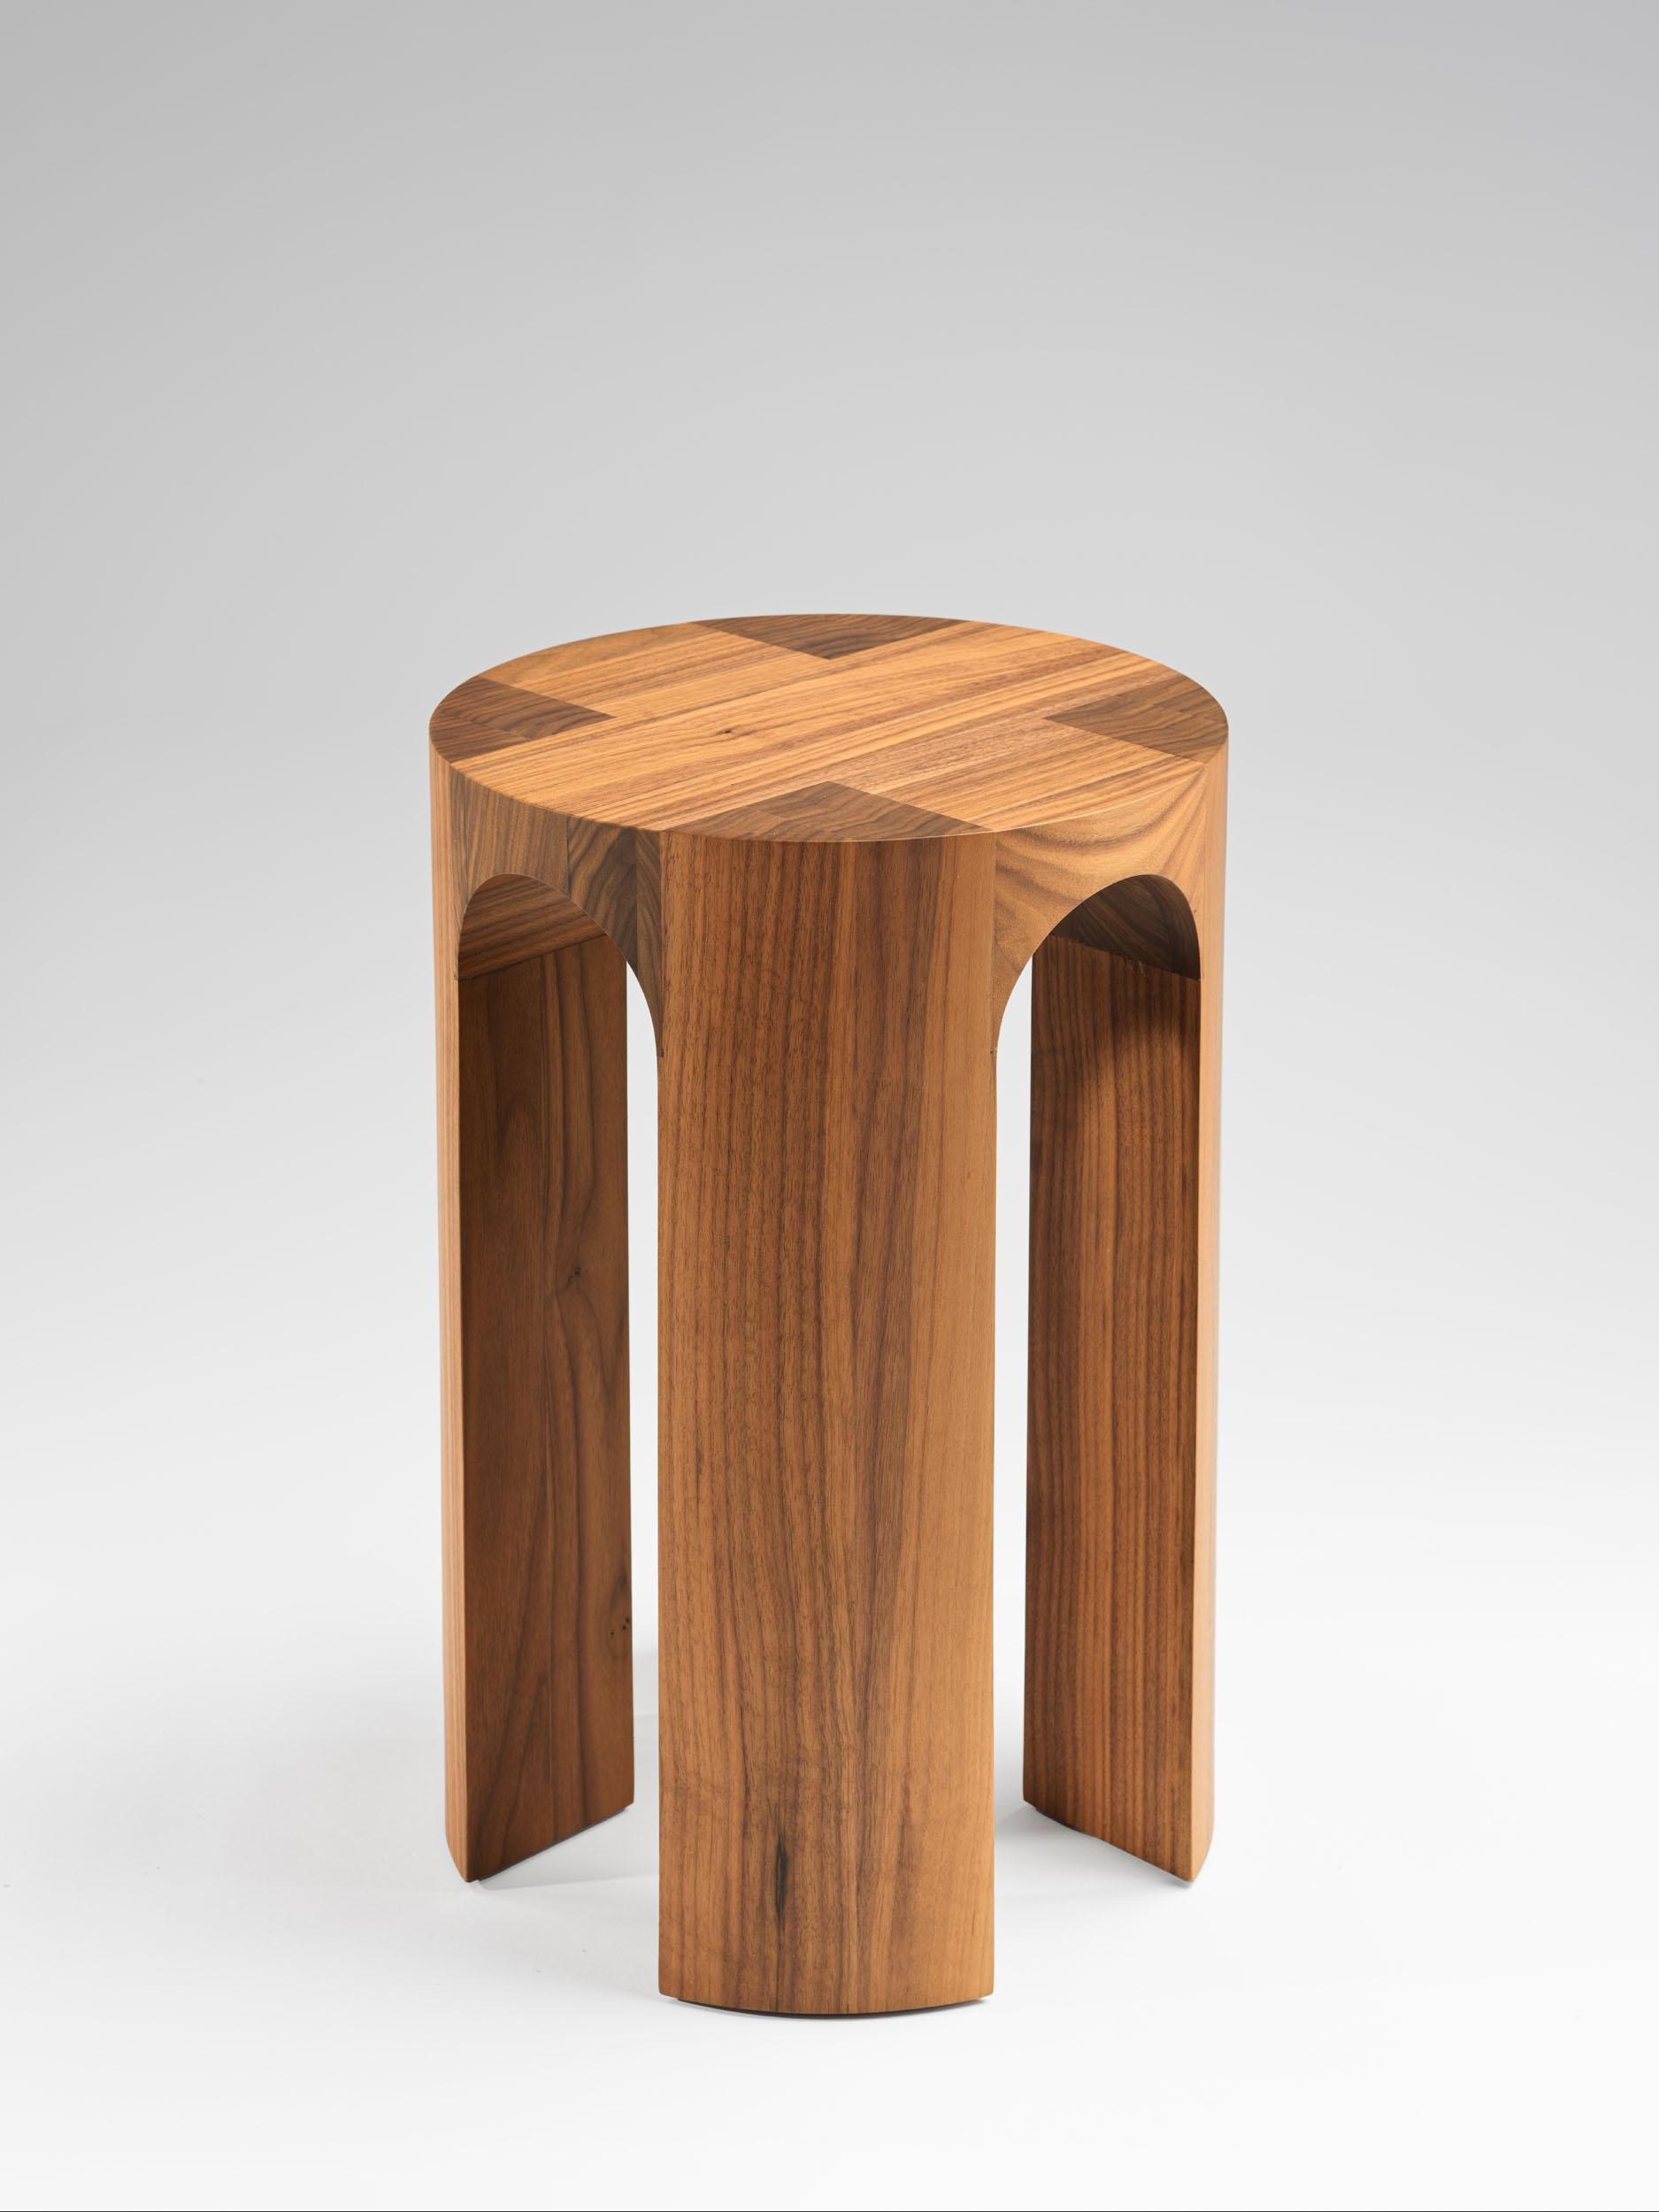 Hand-Crafted Contemporary Solid American Walnut Arcus Stool by Tim Vranken